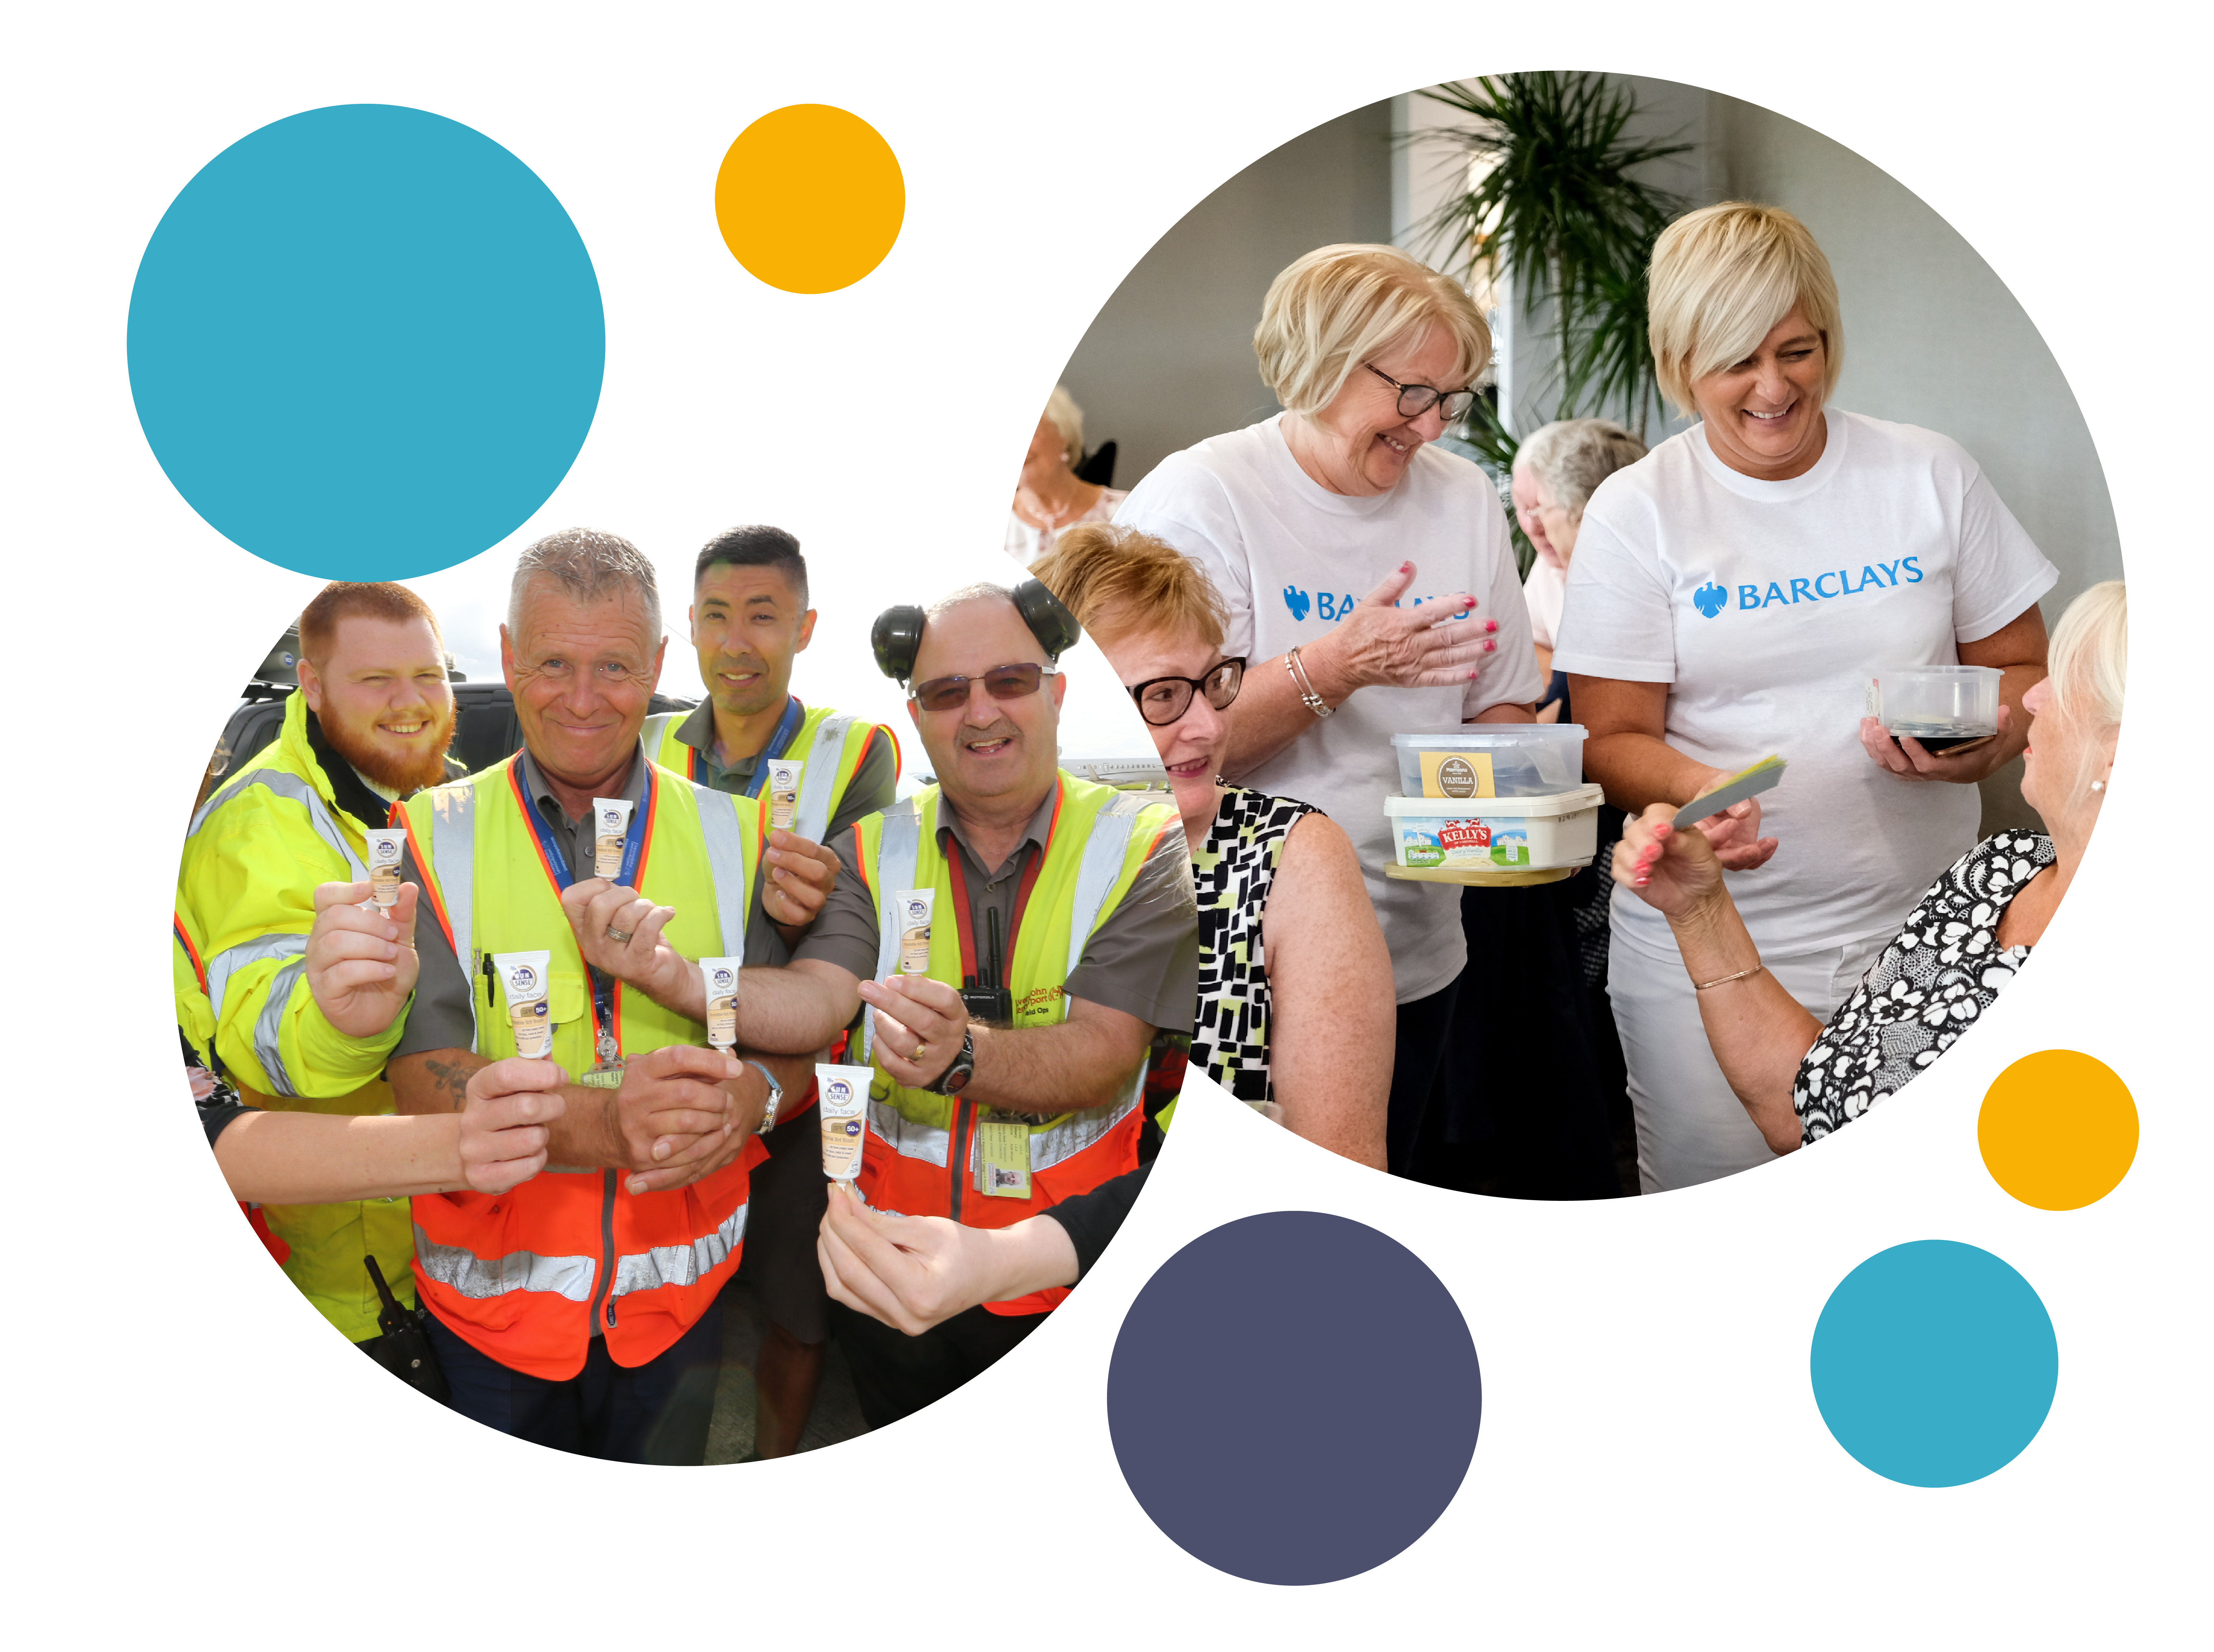 Barclays employees helping at an event 